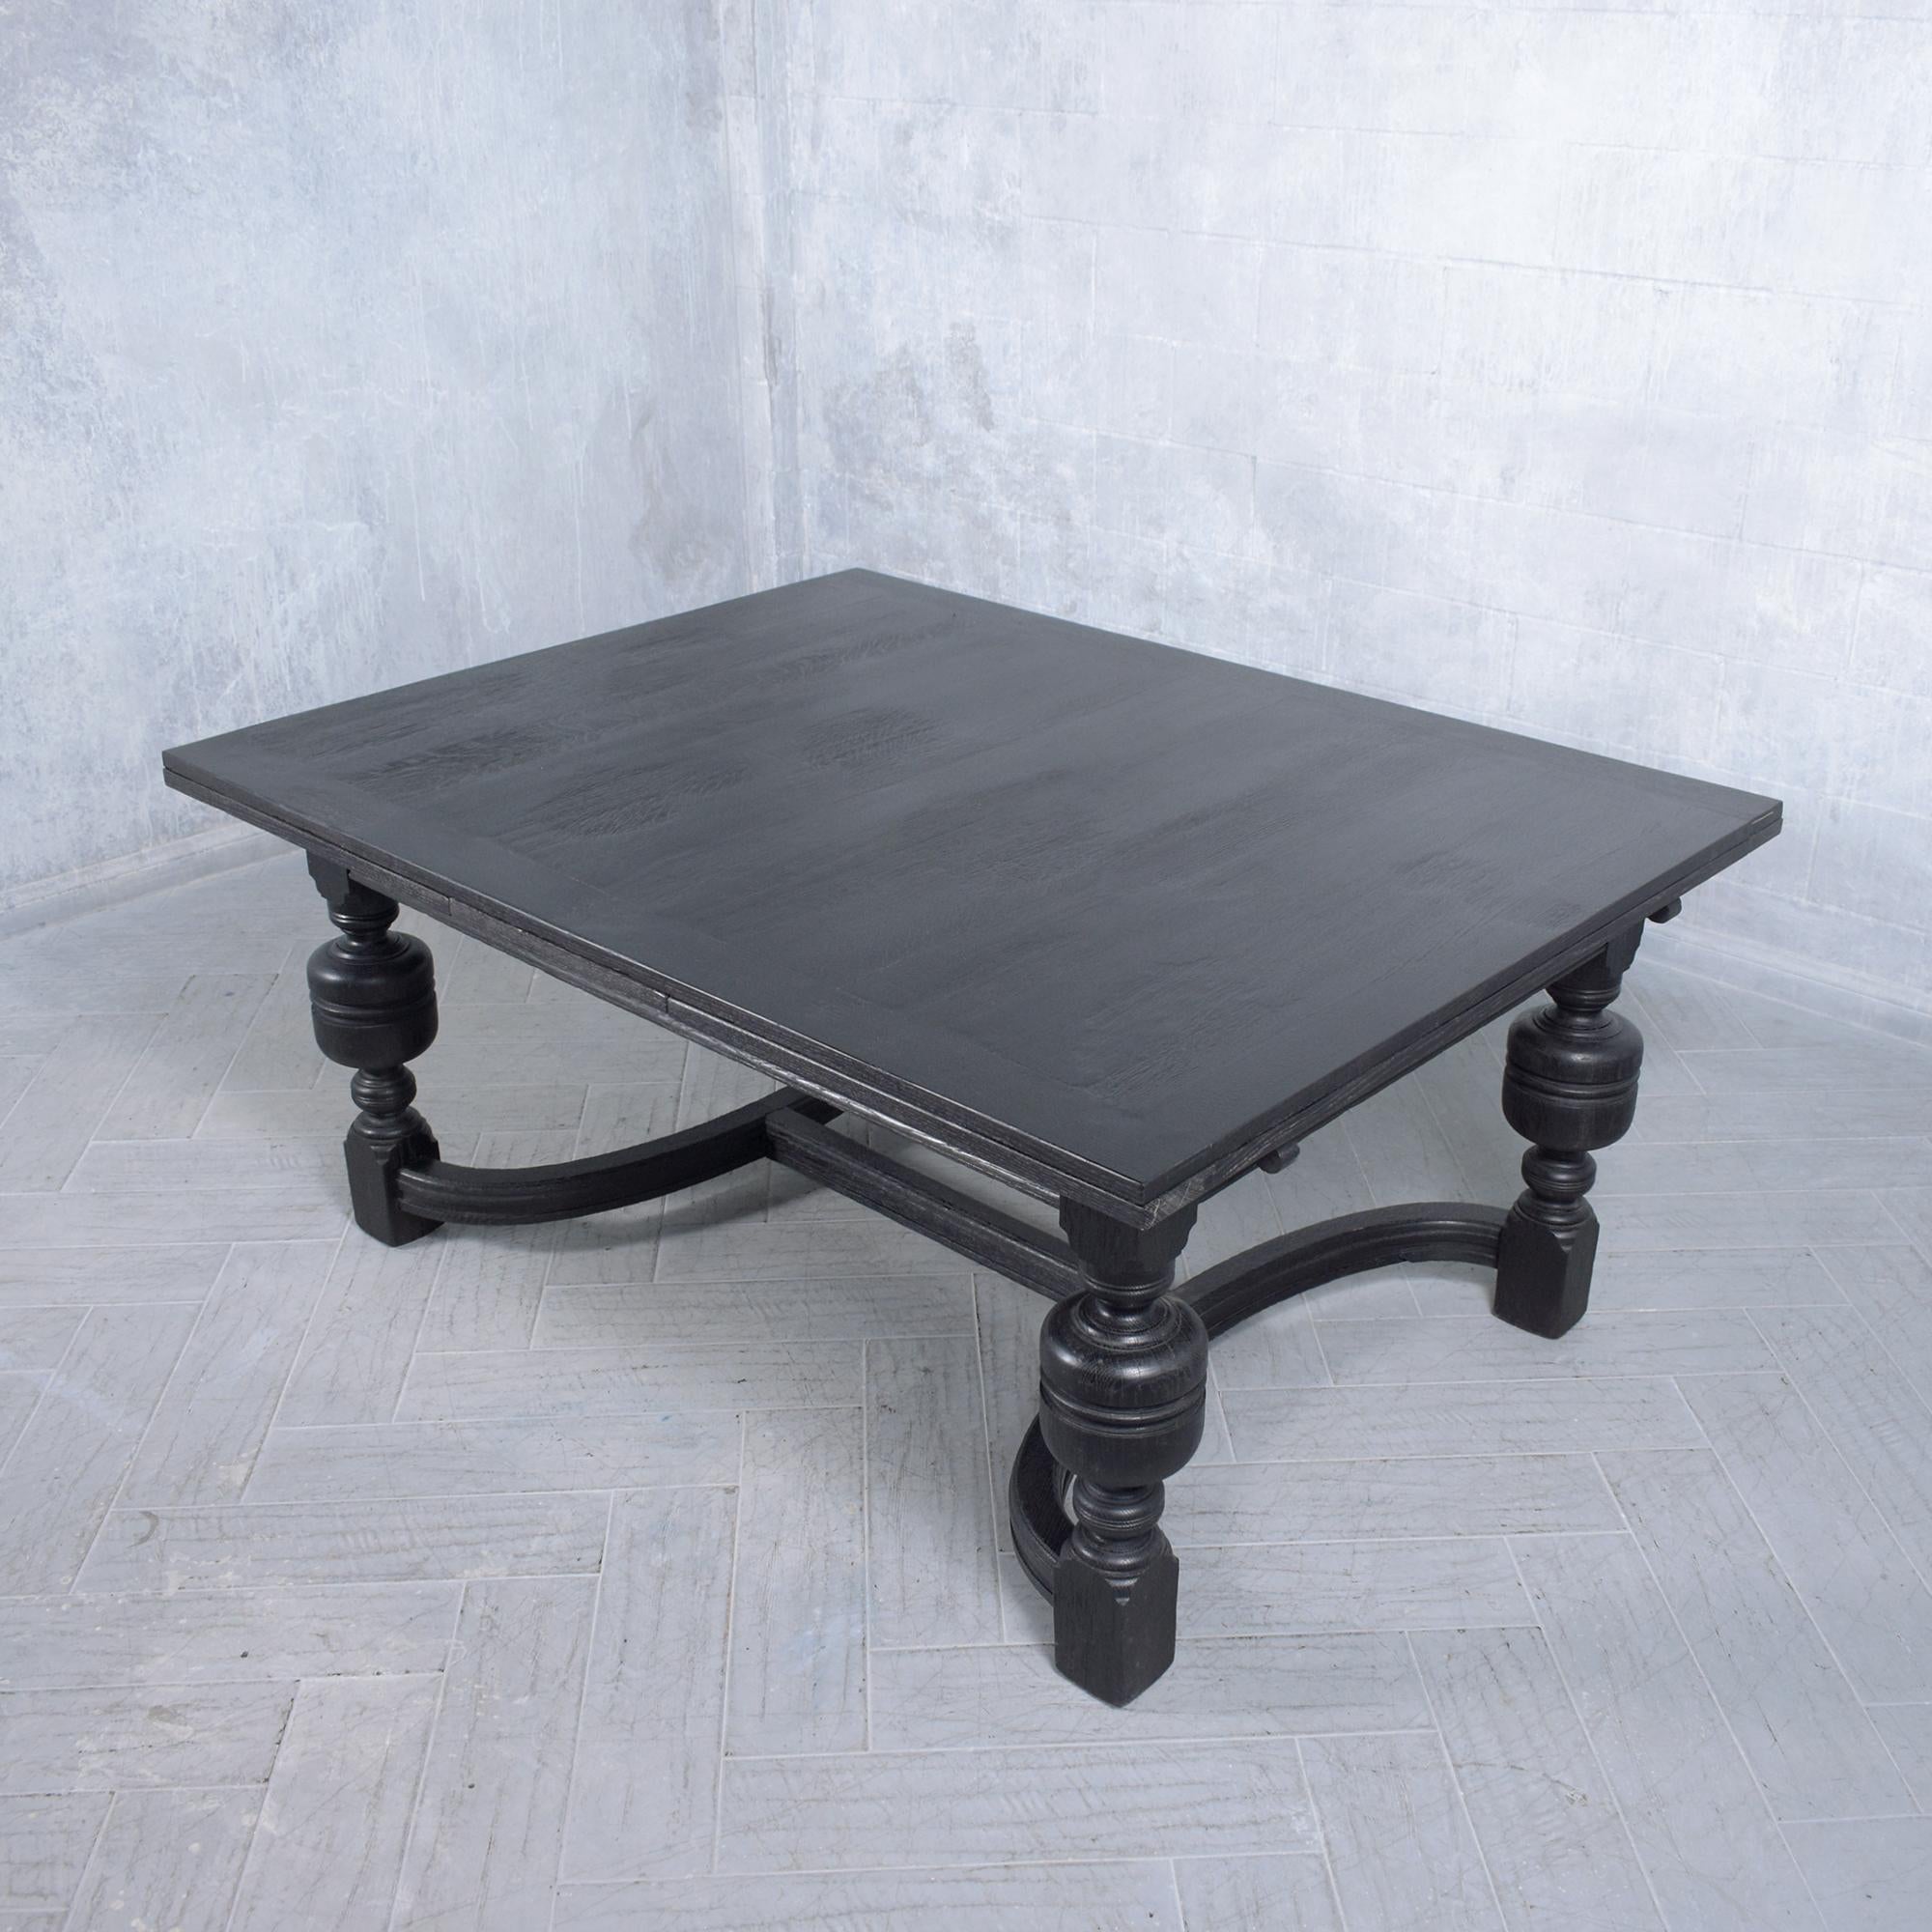 Carved 1850s Spanish Extendable Dining Table: Ebonized Solid Wood with French Design For Sale